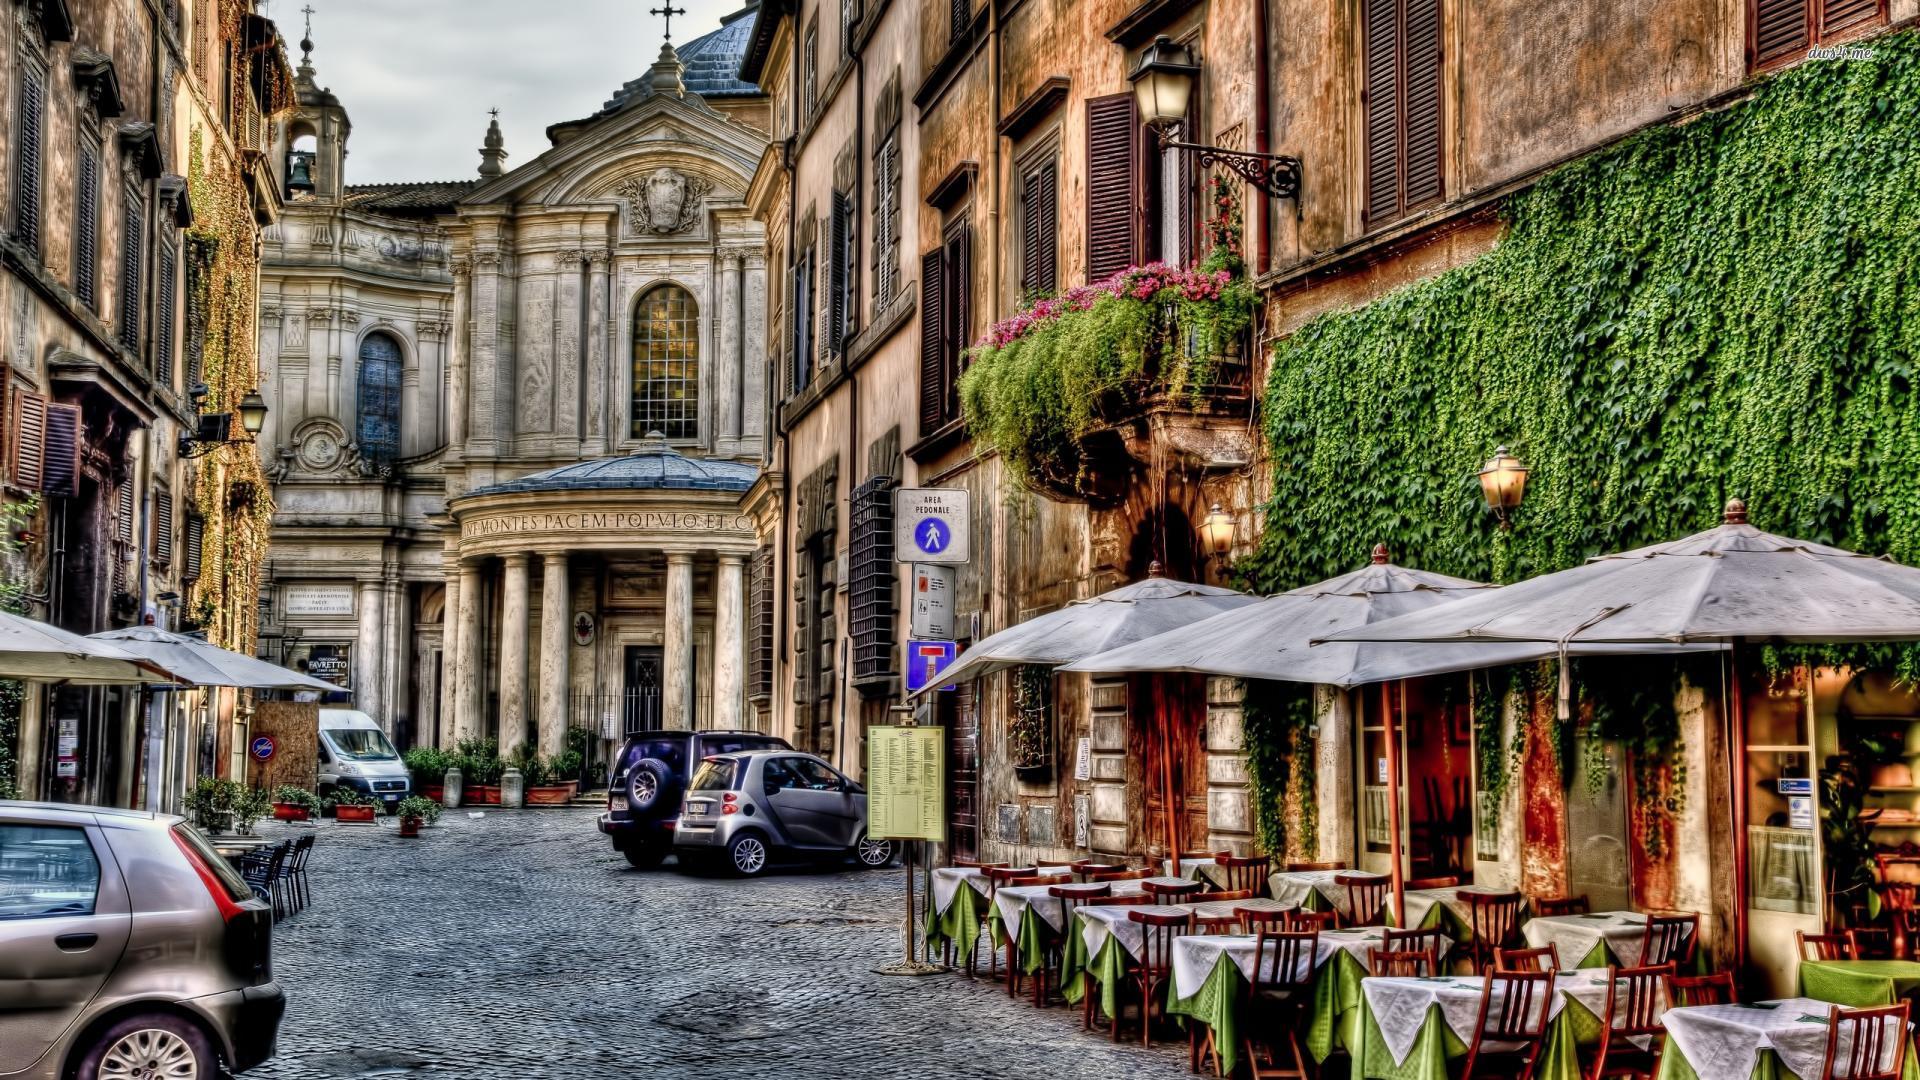 Terrace and alley in Rome wallpaper wallpaper